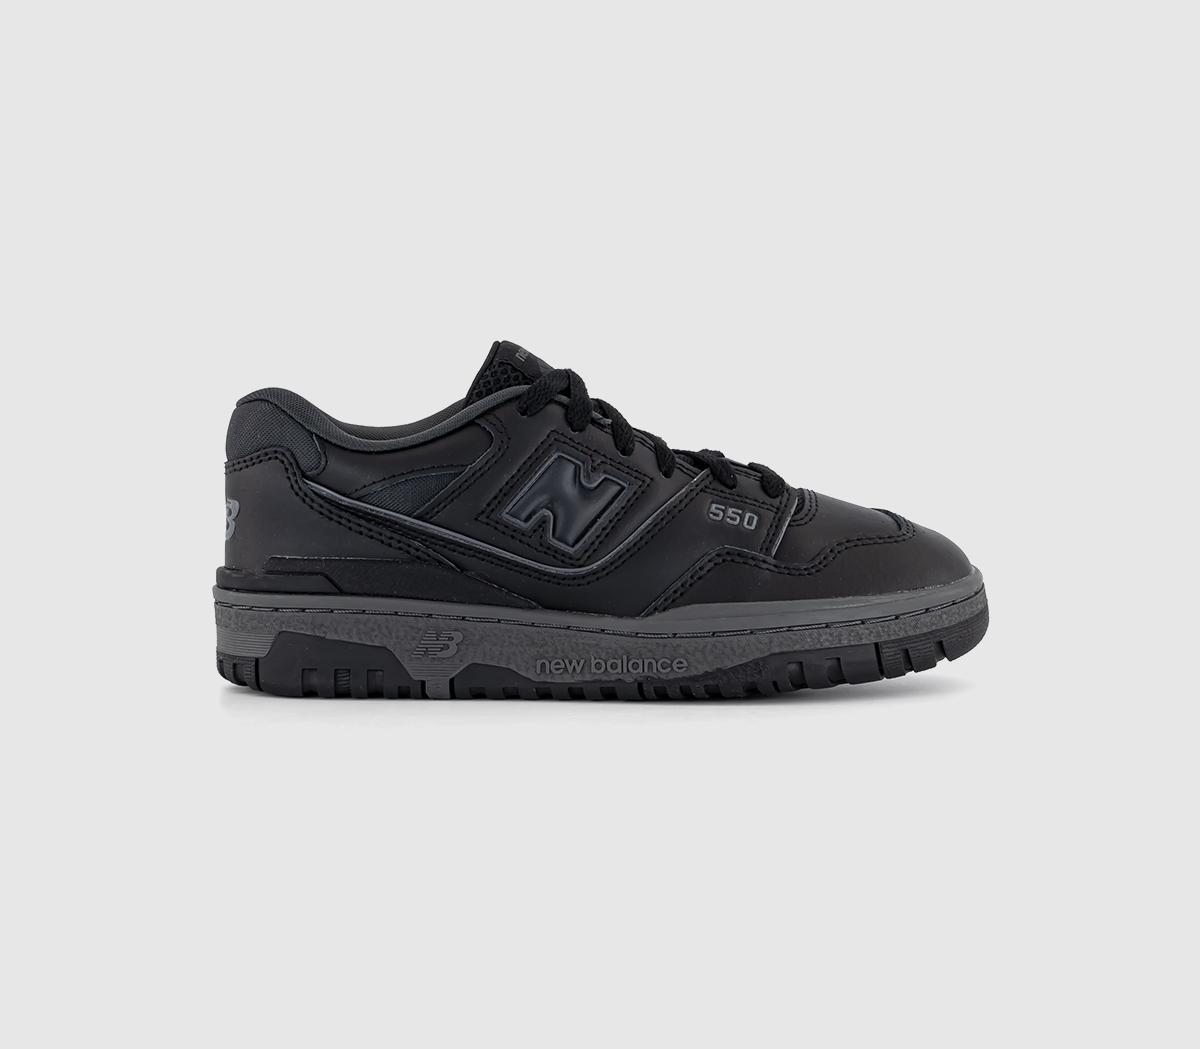 New Balance Bb550 Gs Trainers Black - Women's Trainers